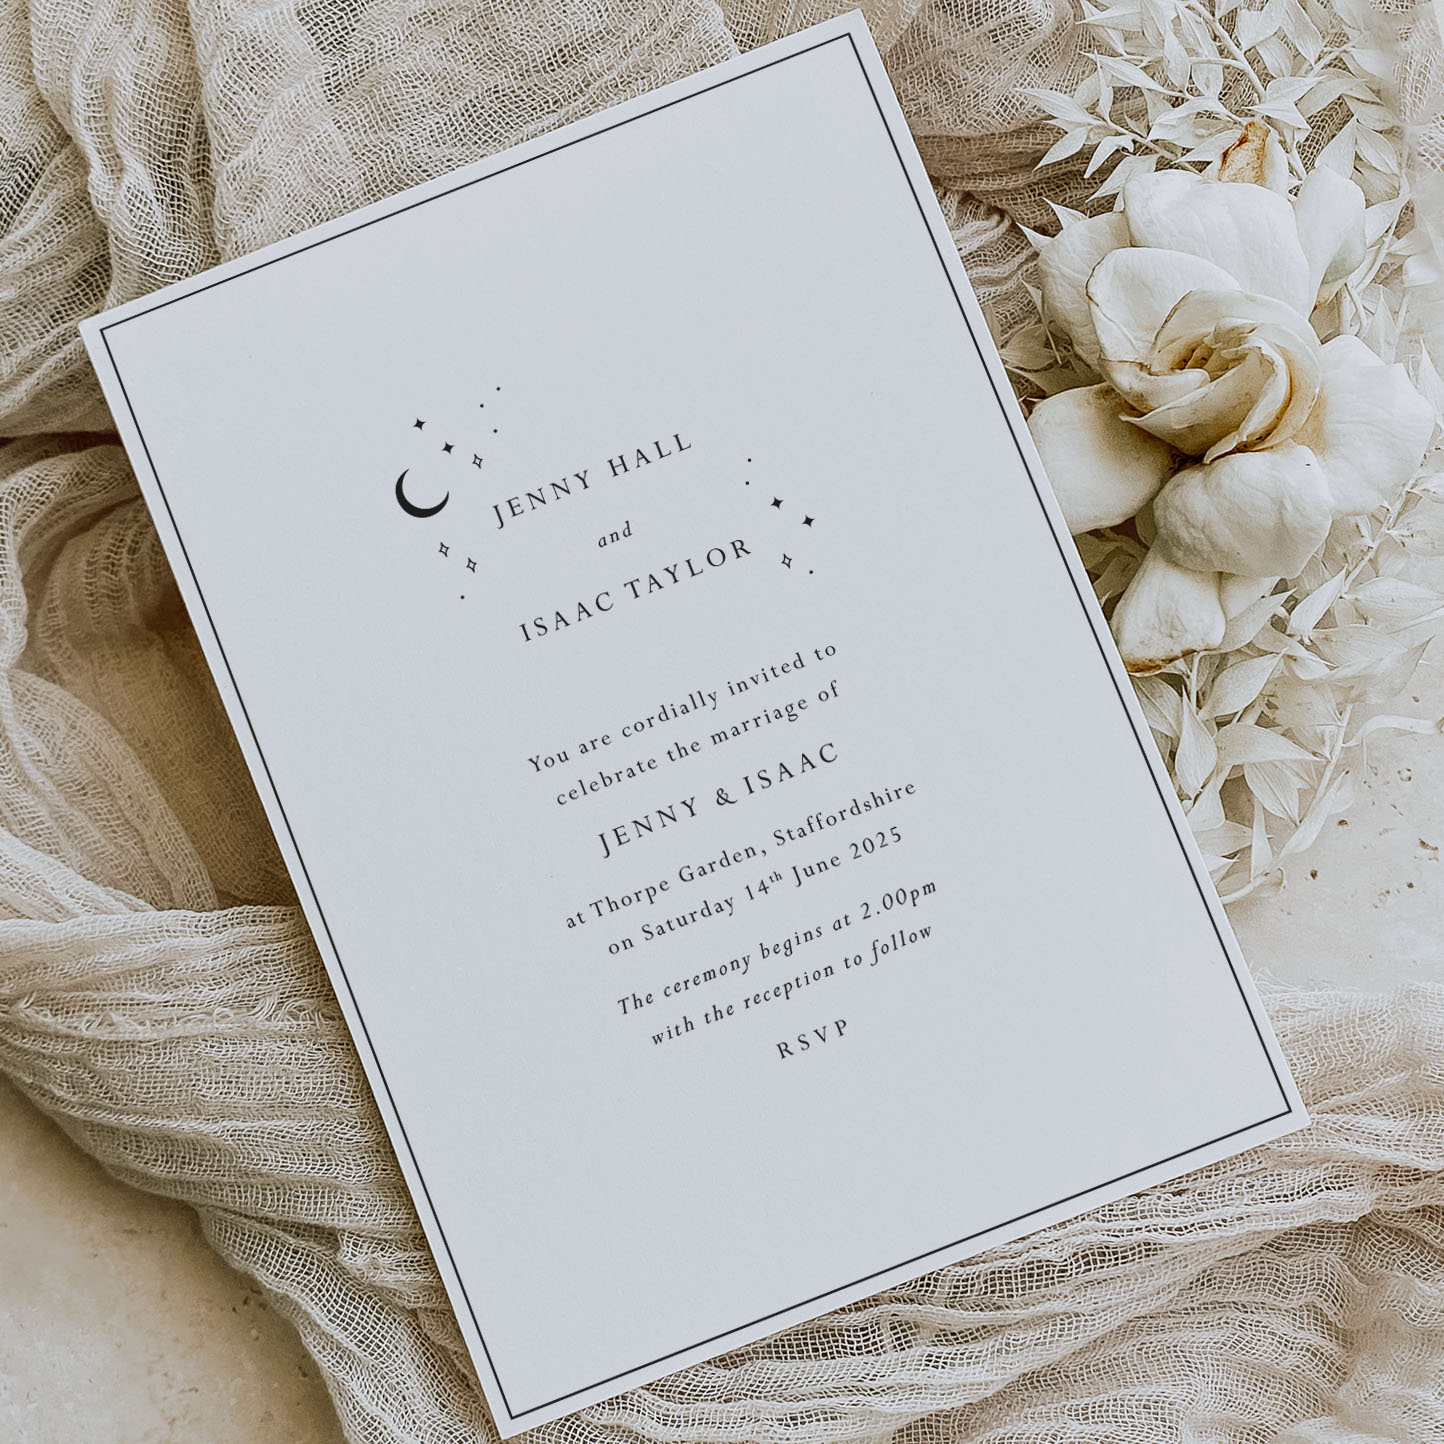 starry skies - simple modern celestial wedding invitation shown with a cream flower